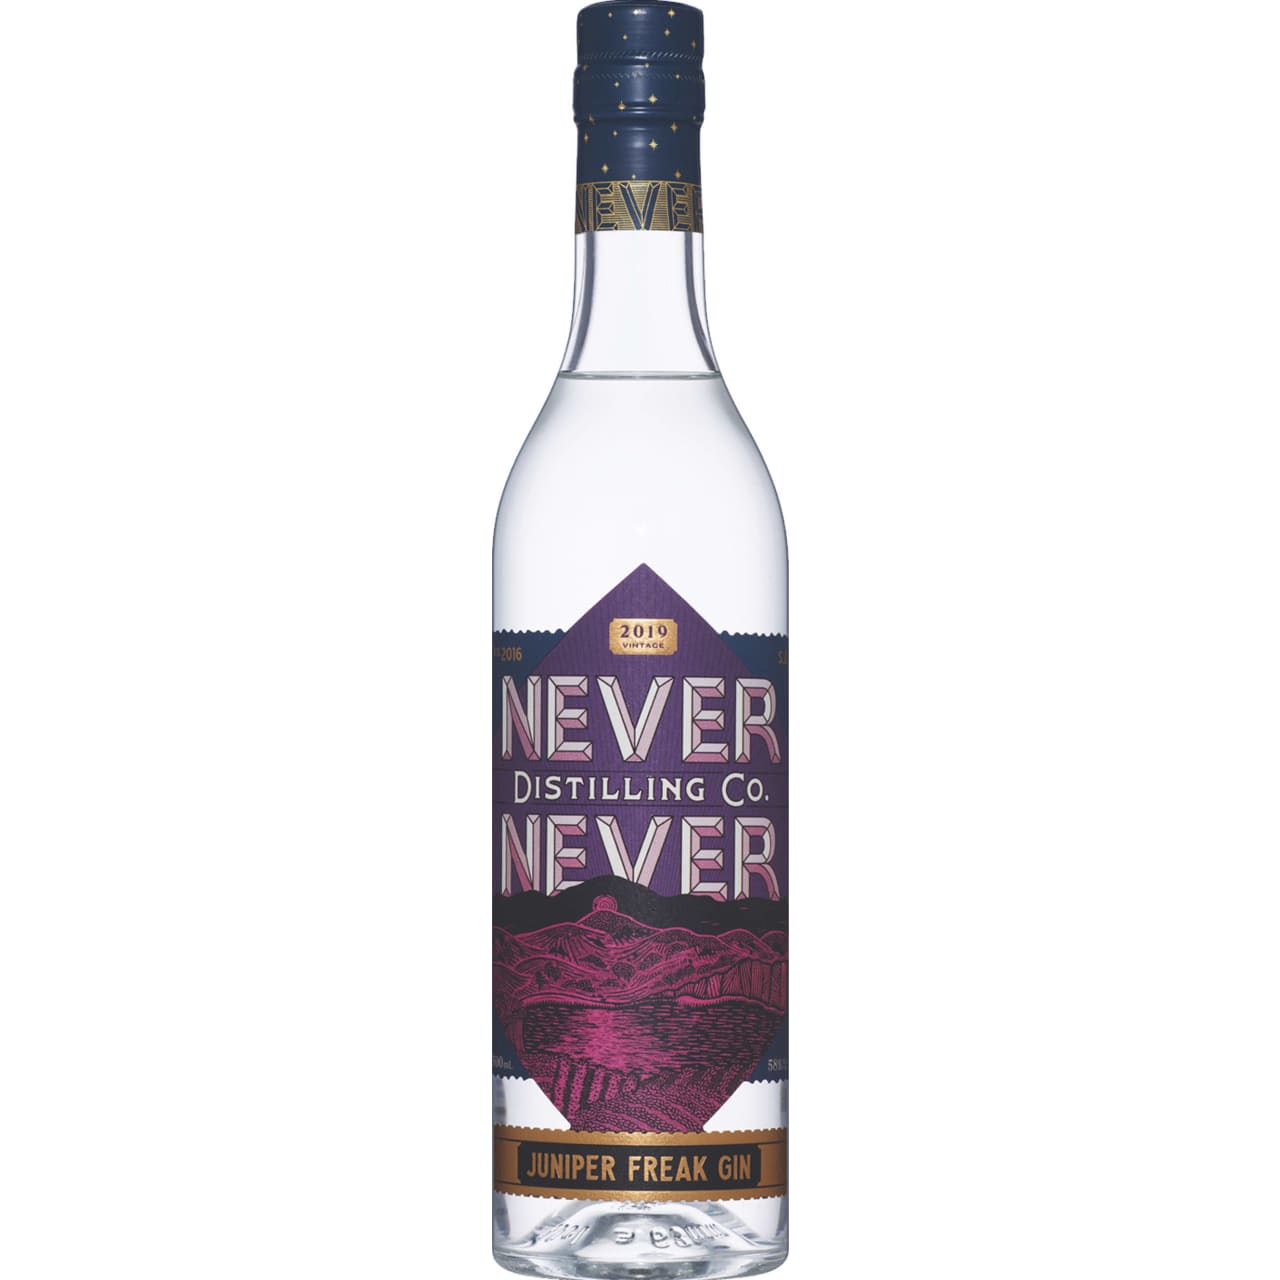 Never Never have embraced our love of juniper and maxed it out in this wonderfully intense, aromatic, flavoursome gin. At 58% abv, the juniper leaps from the bottle, fills the nostrils and tingles the lips.